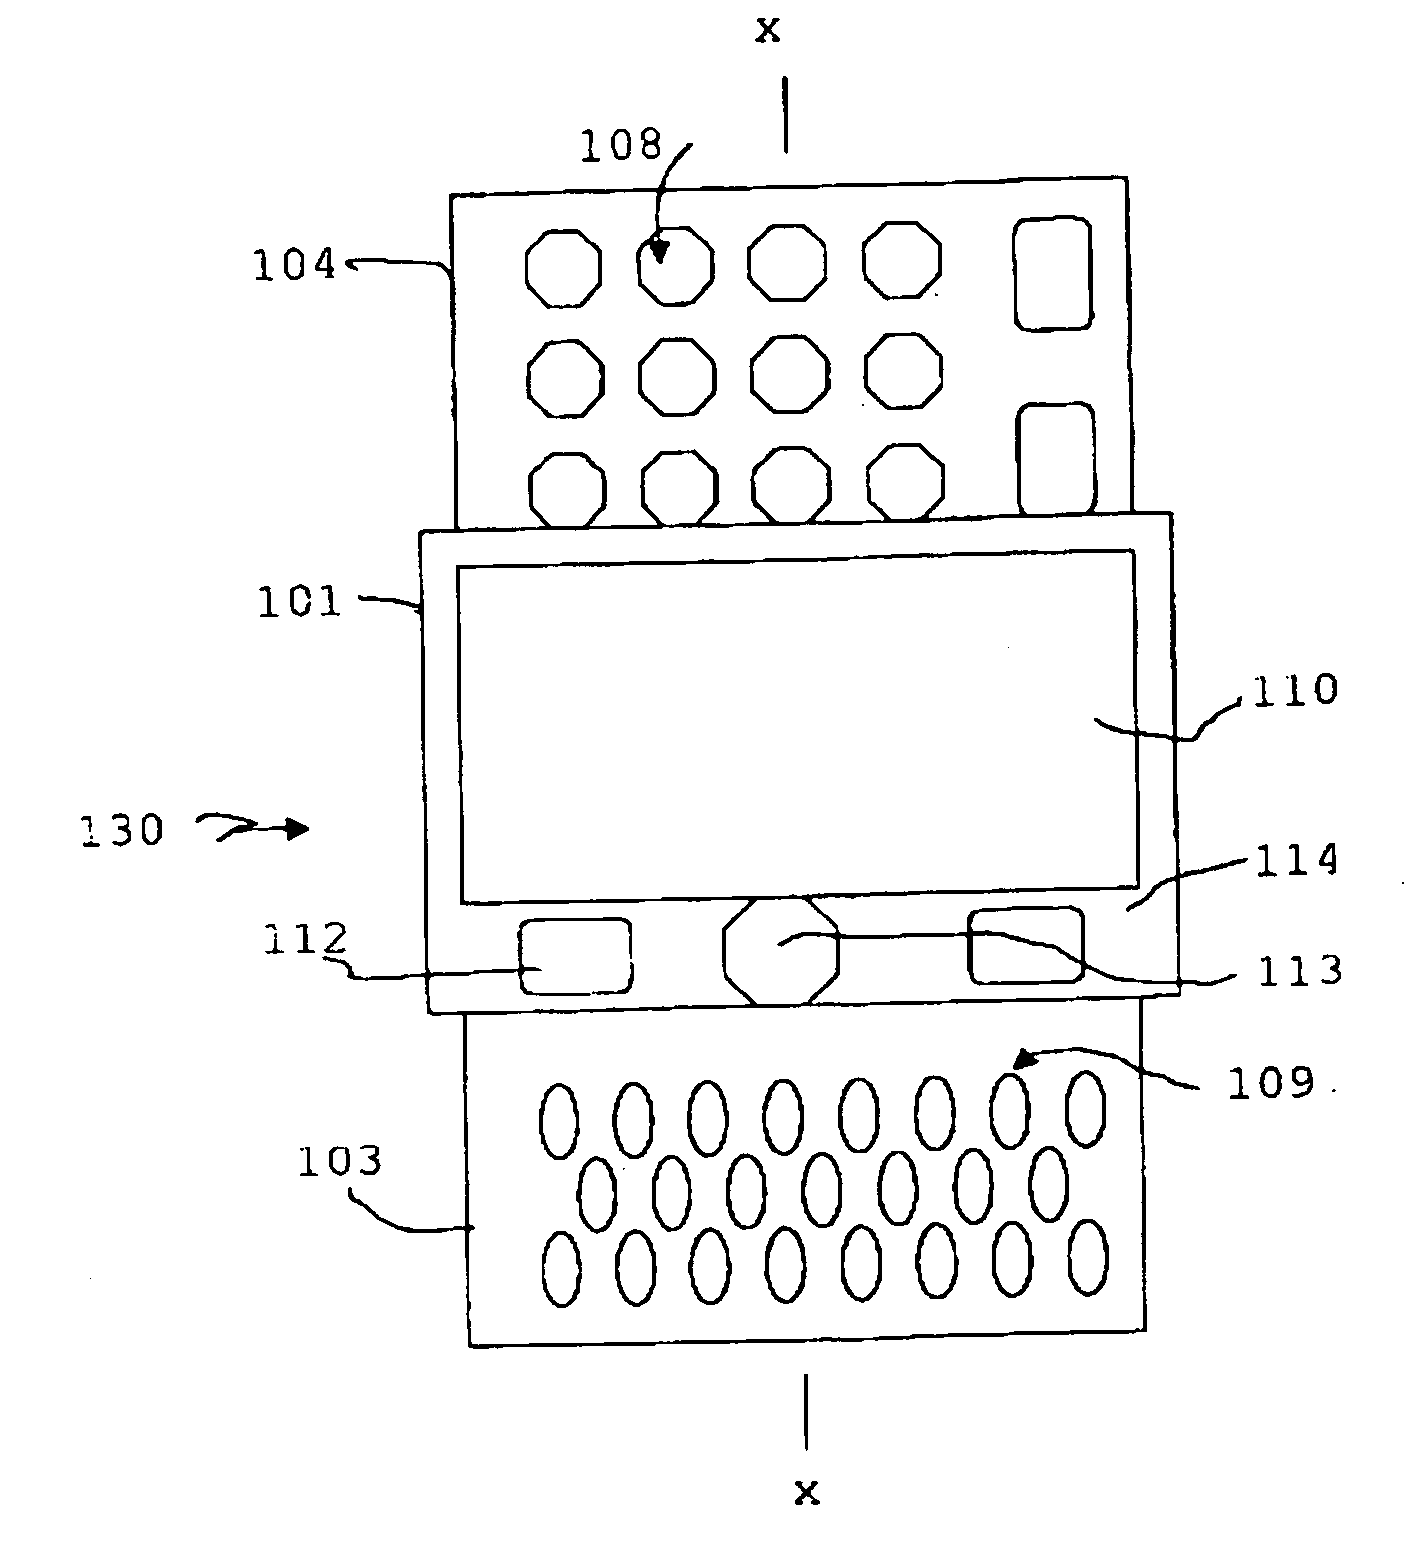 Multi-function electronic device with nested sliding panels